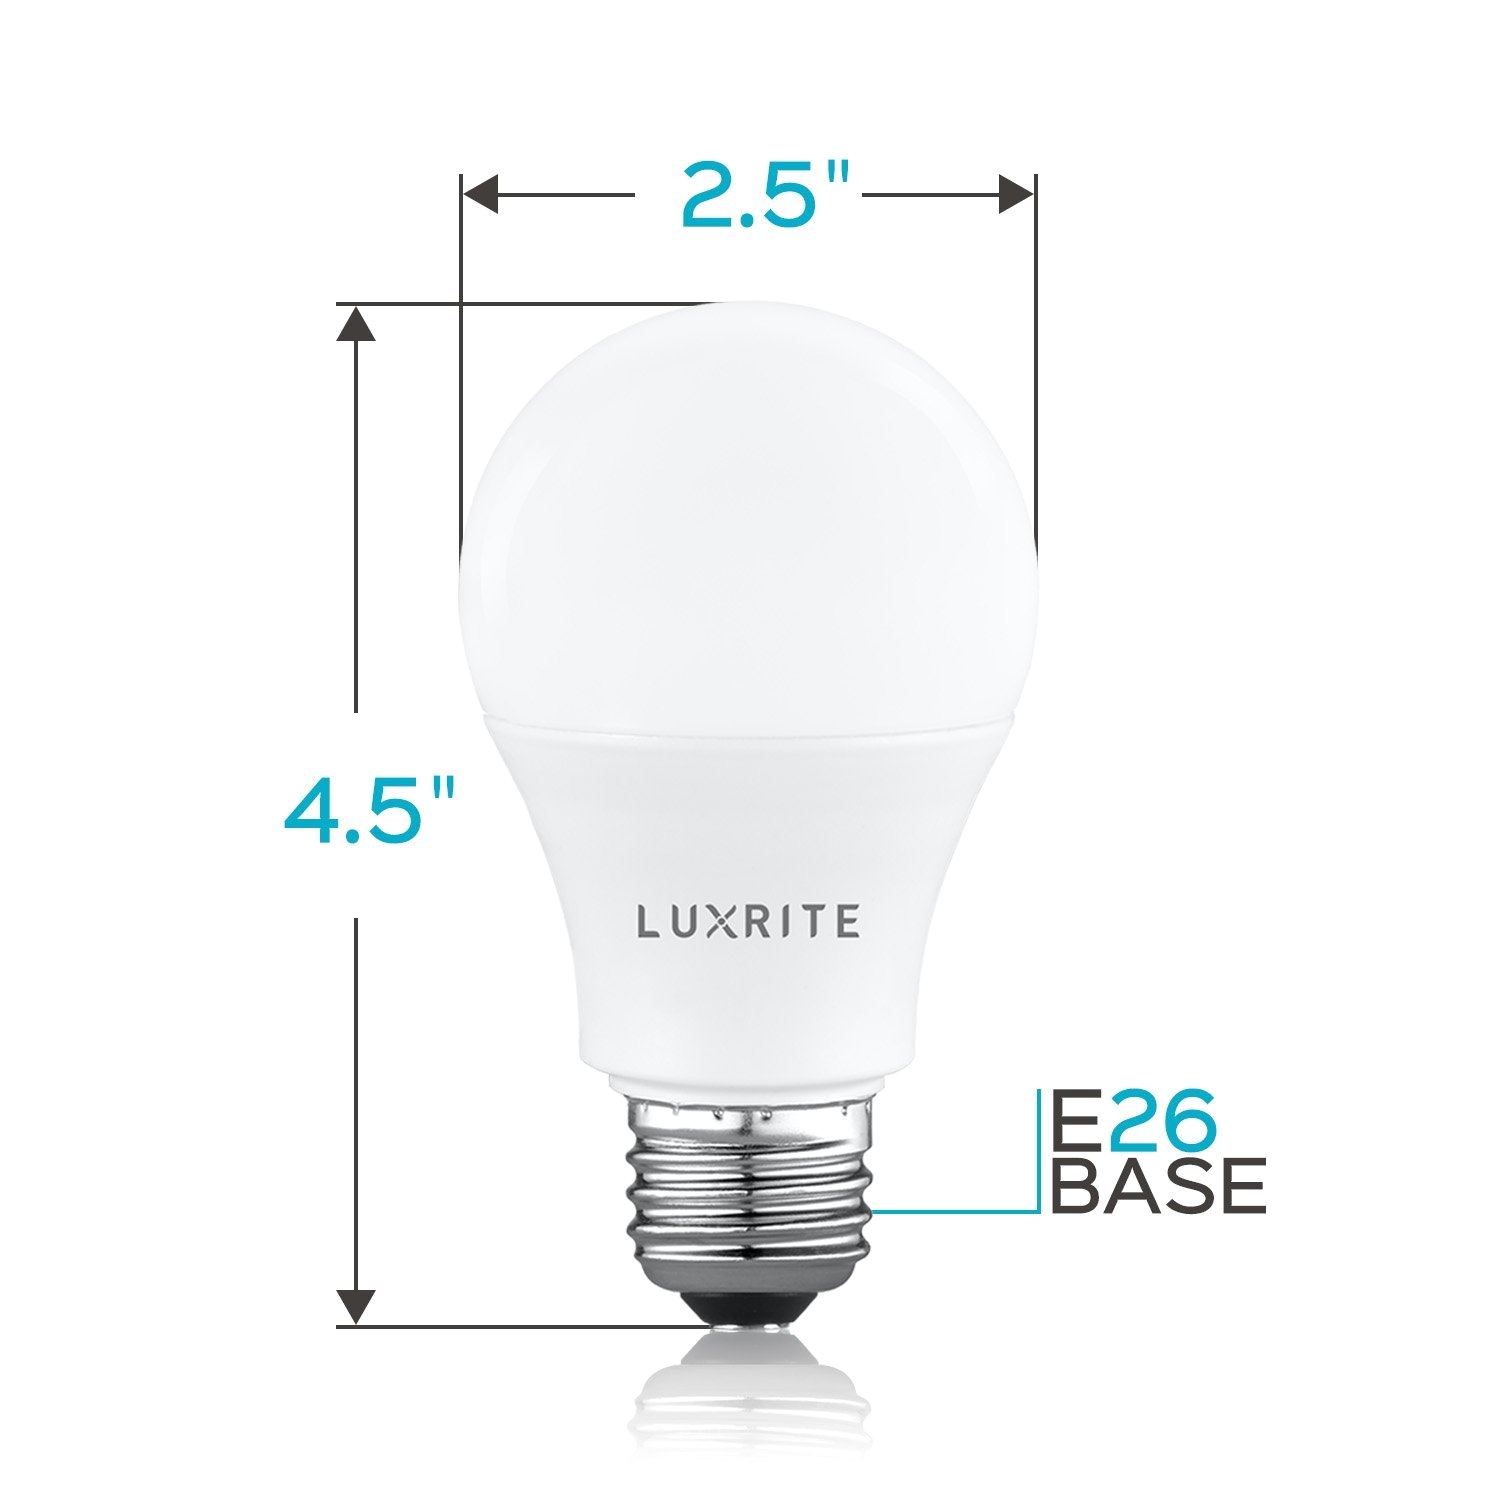 luxrite a19 led light bulb 60w equivalent 5000k daylight white dimmable 800 lumen standard led bulb 9w e26 base energy star enclosed fixture rated